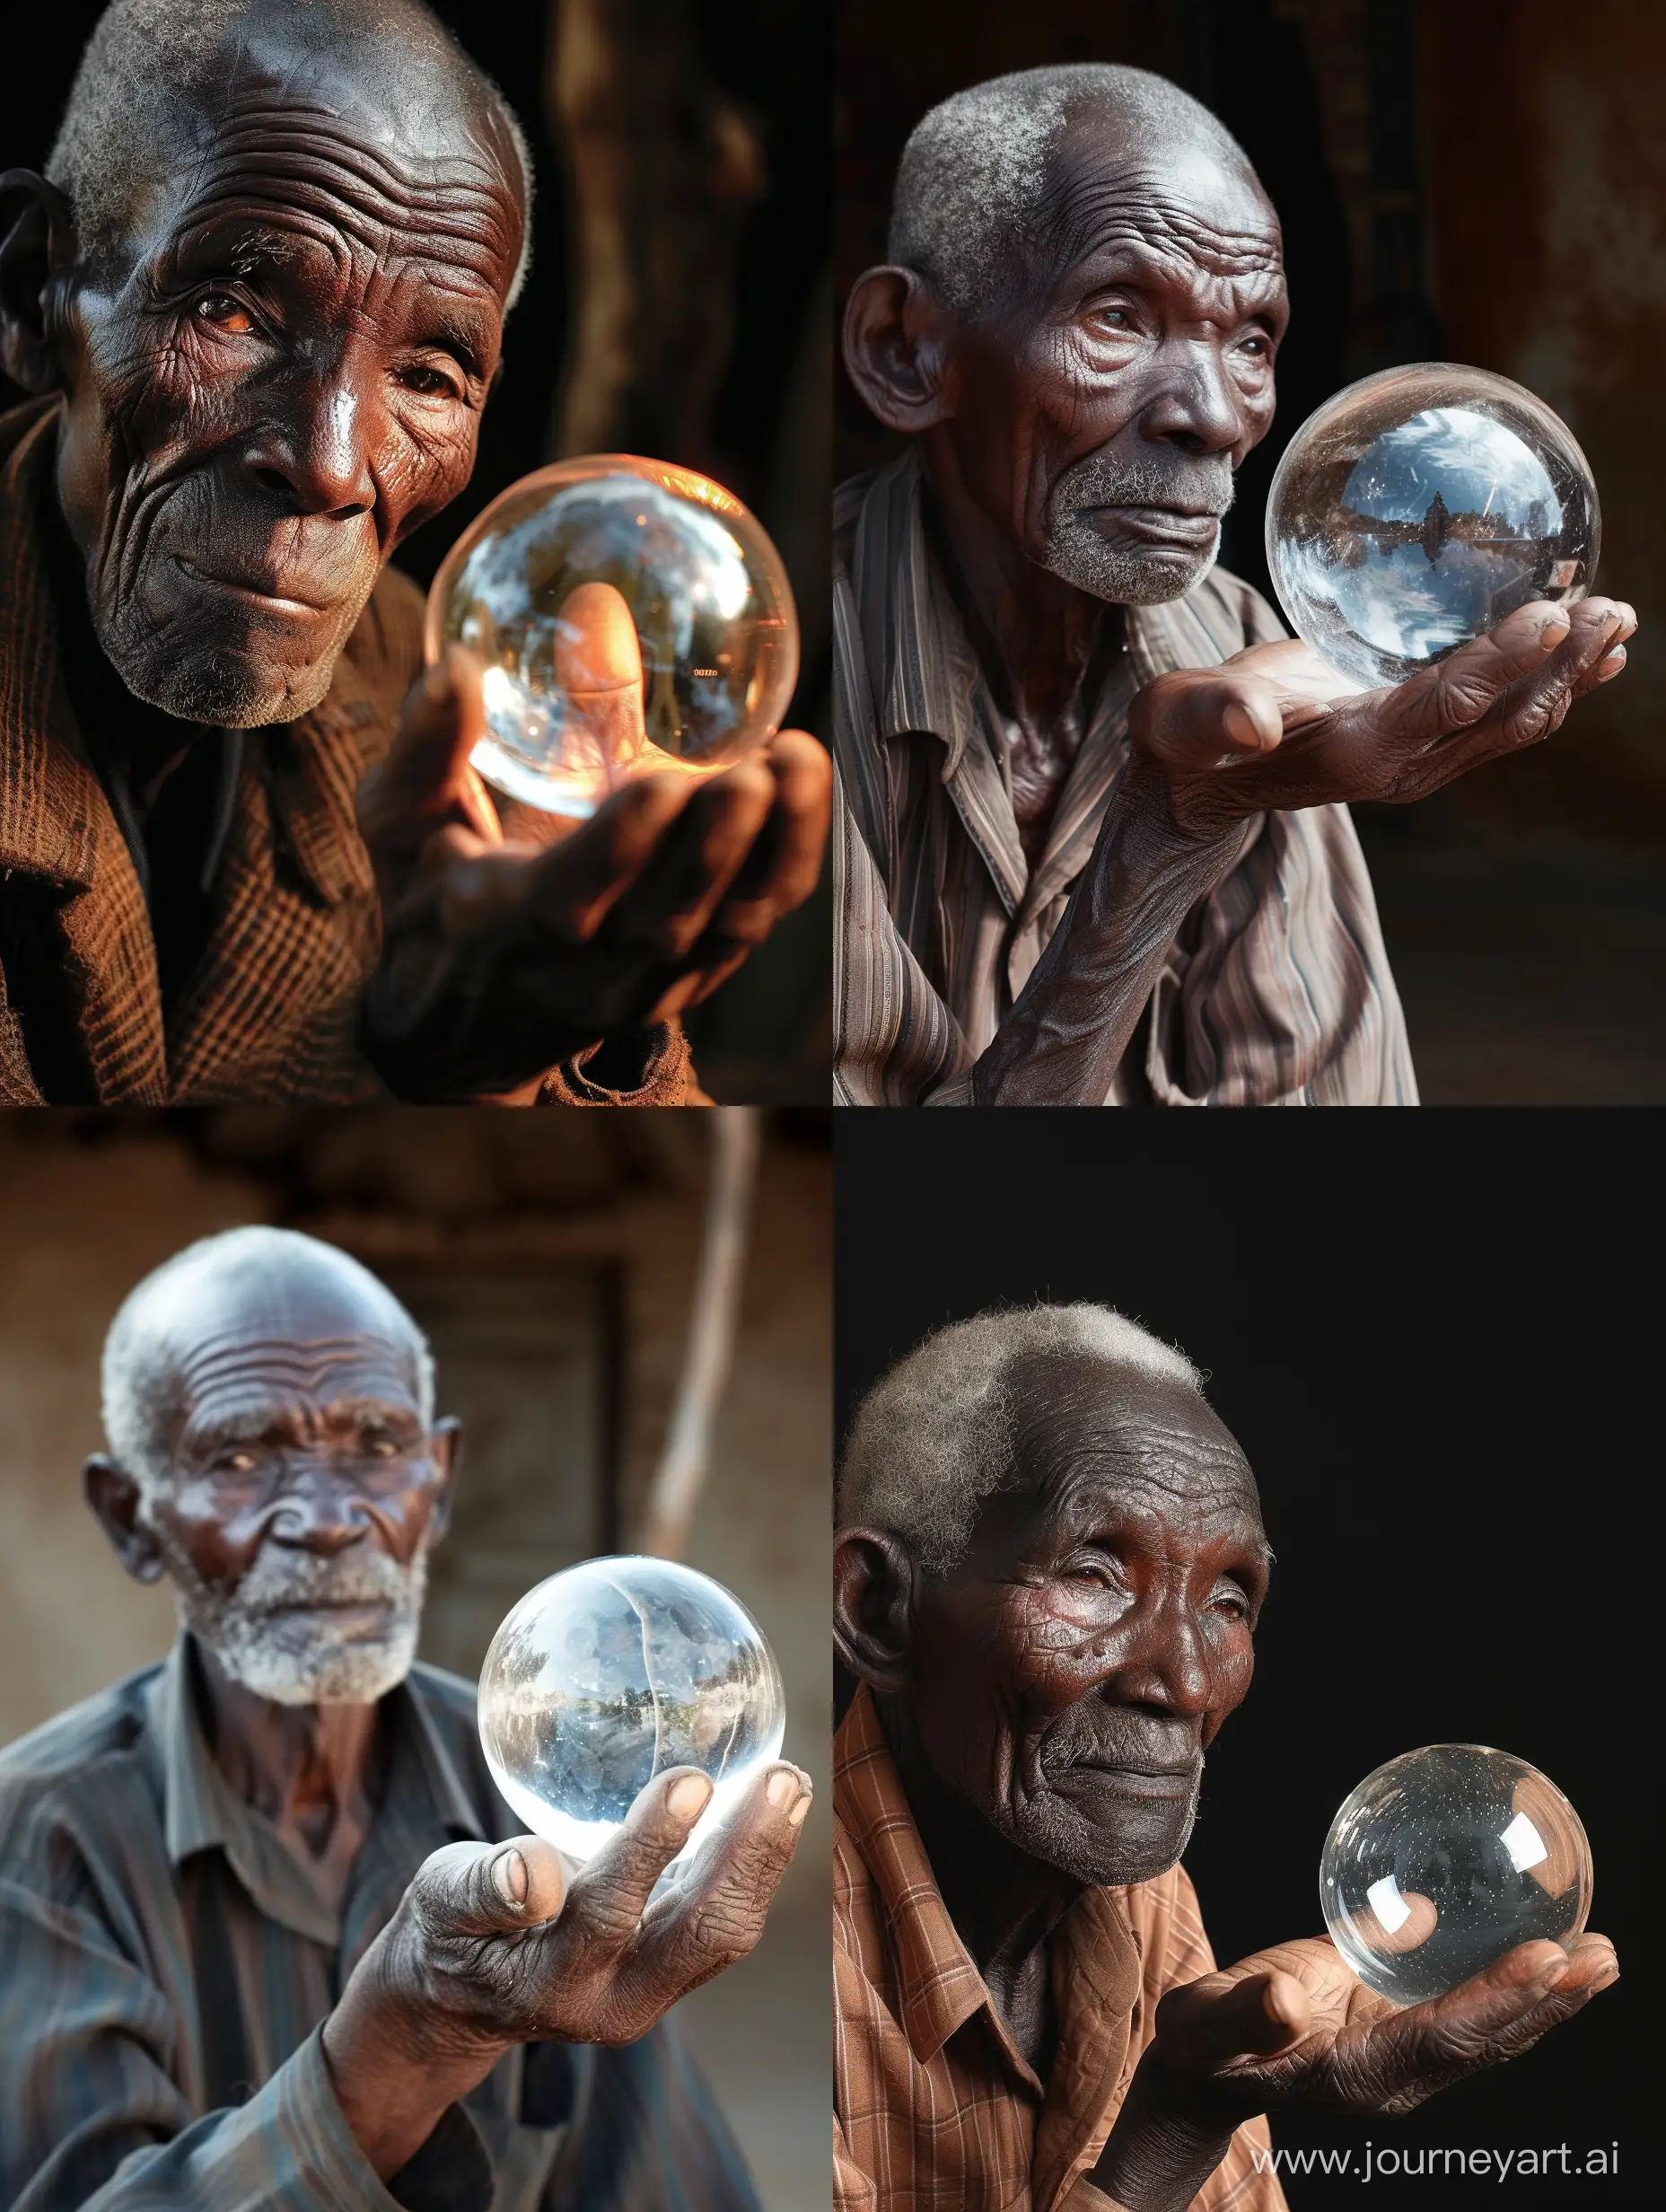 Elderly-African-Man-Gazing-into-a-Reflective-Sphere